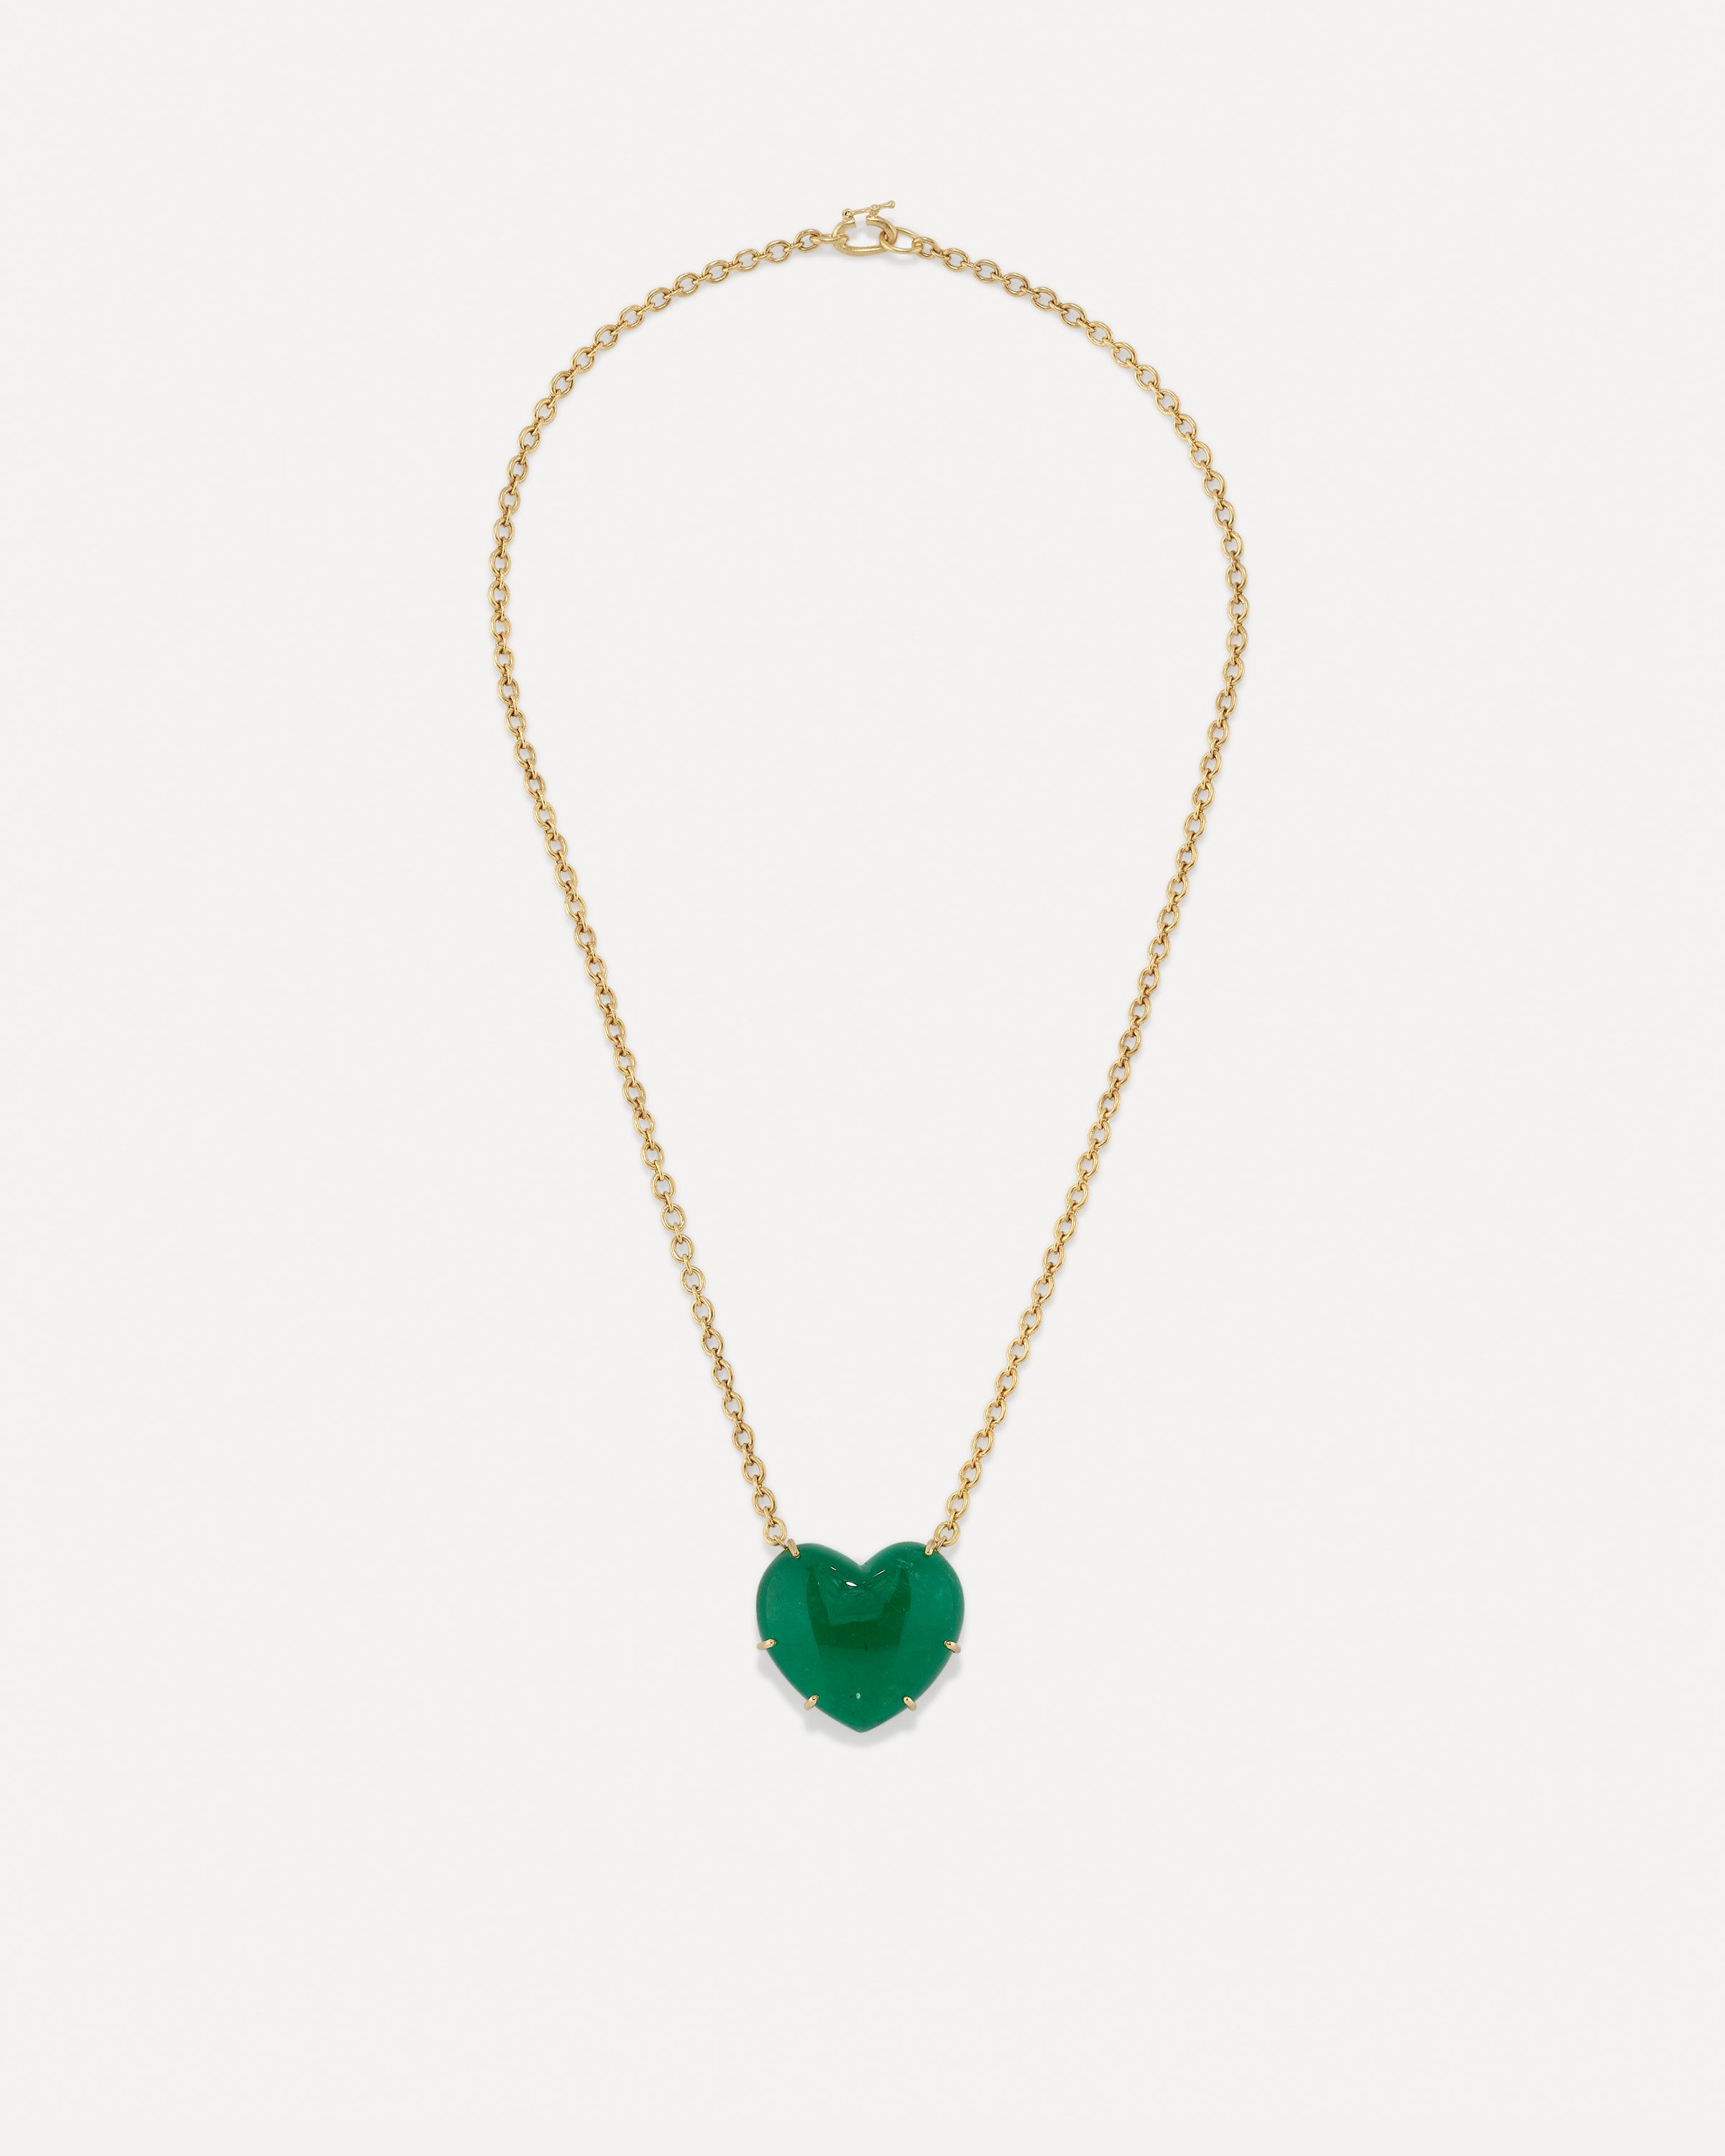 Halo Heart shaped Emerald necklace, Heart cut 8*8 mm Emerald pendant, Muzo  Green Emerald Necklace, Green Heart Pendant, May Birthstone Gift